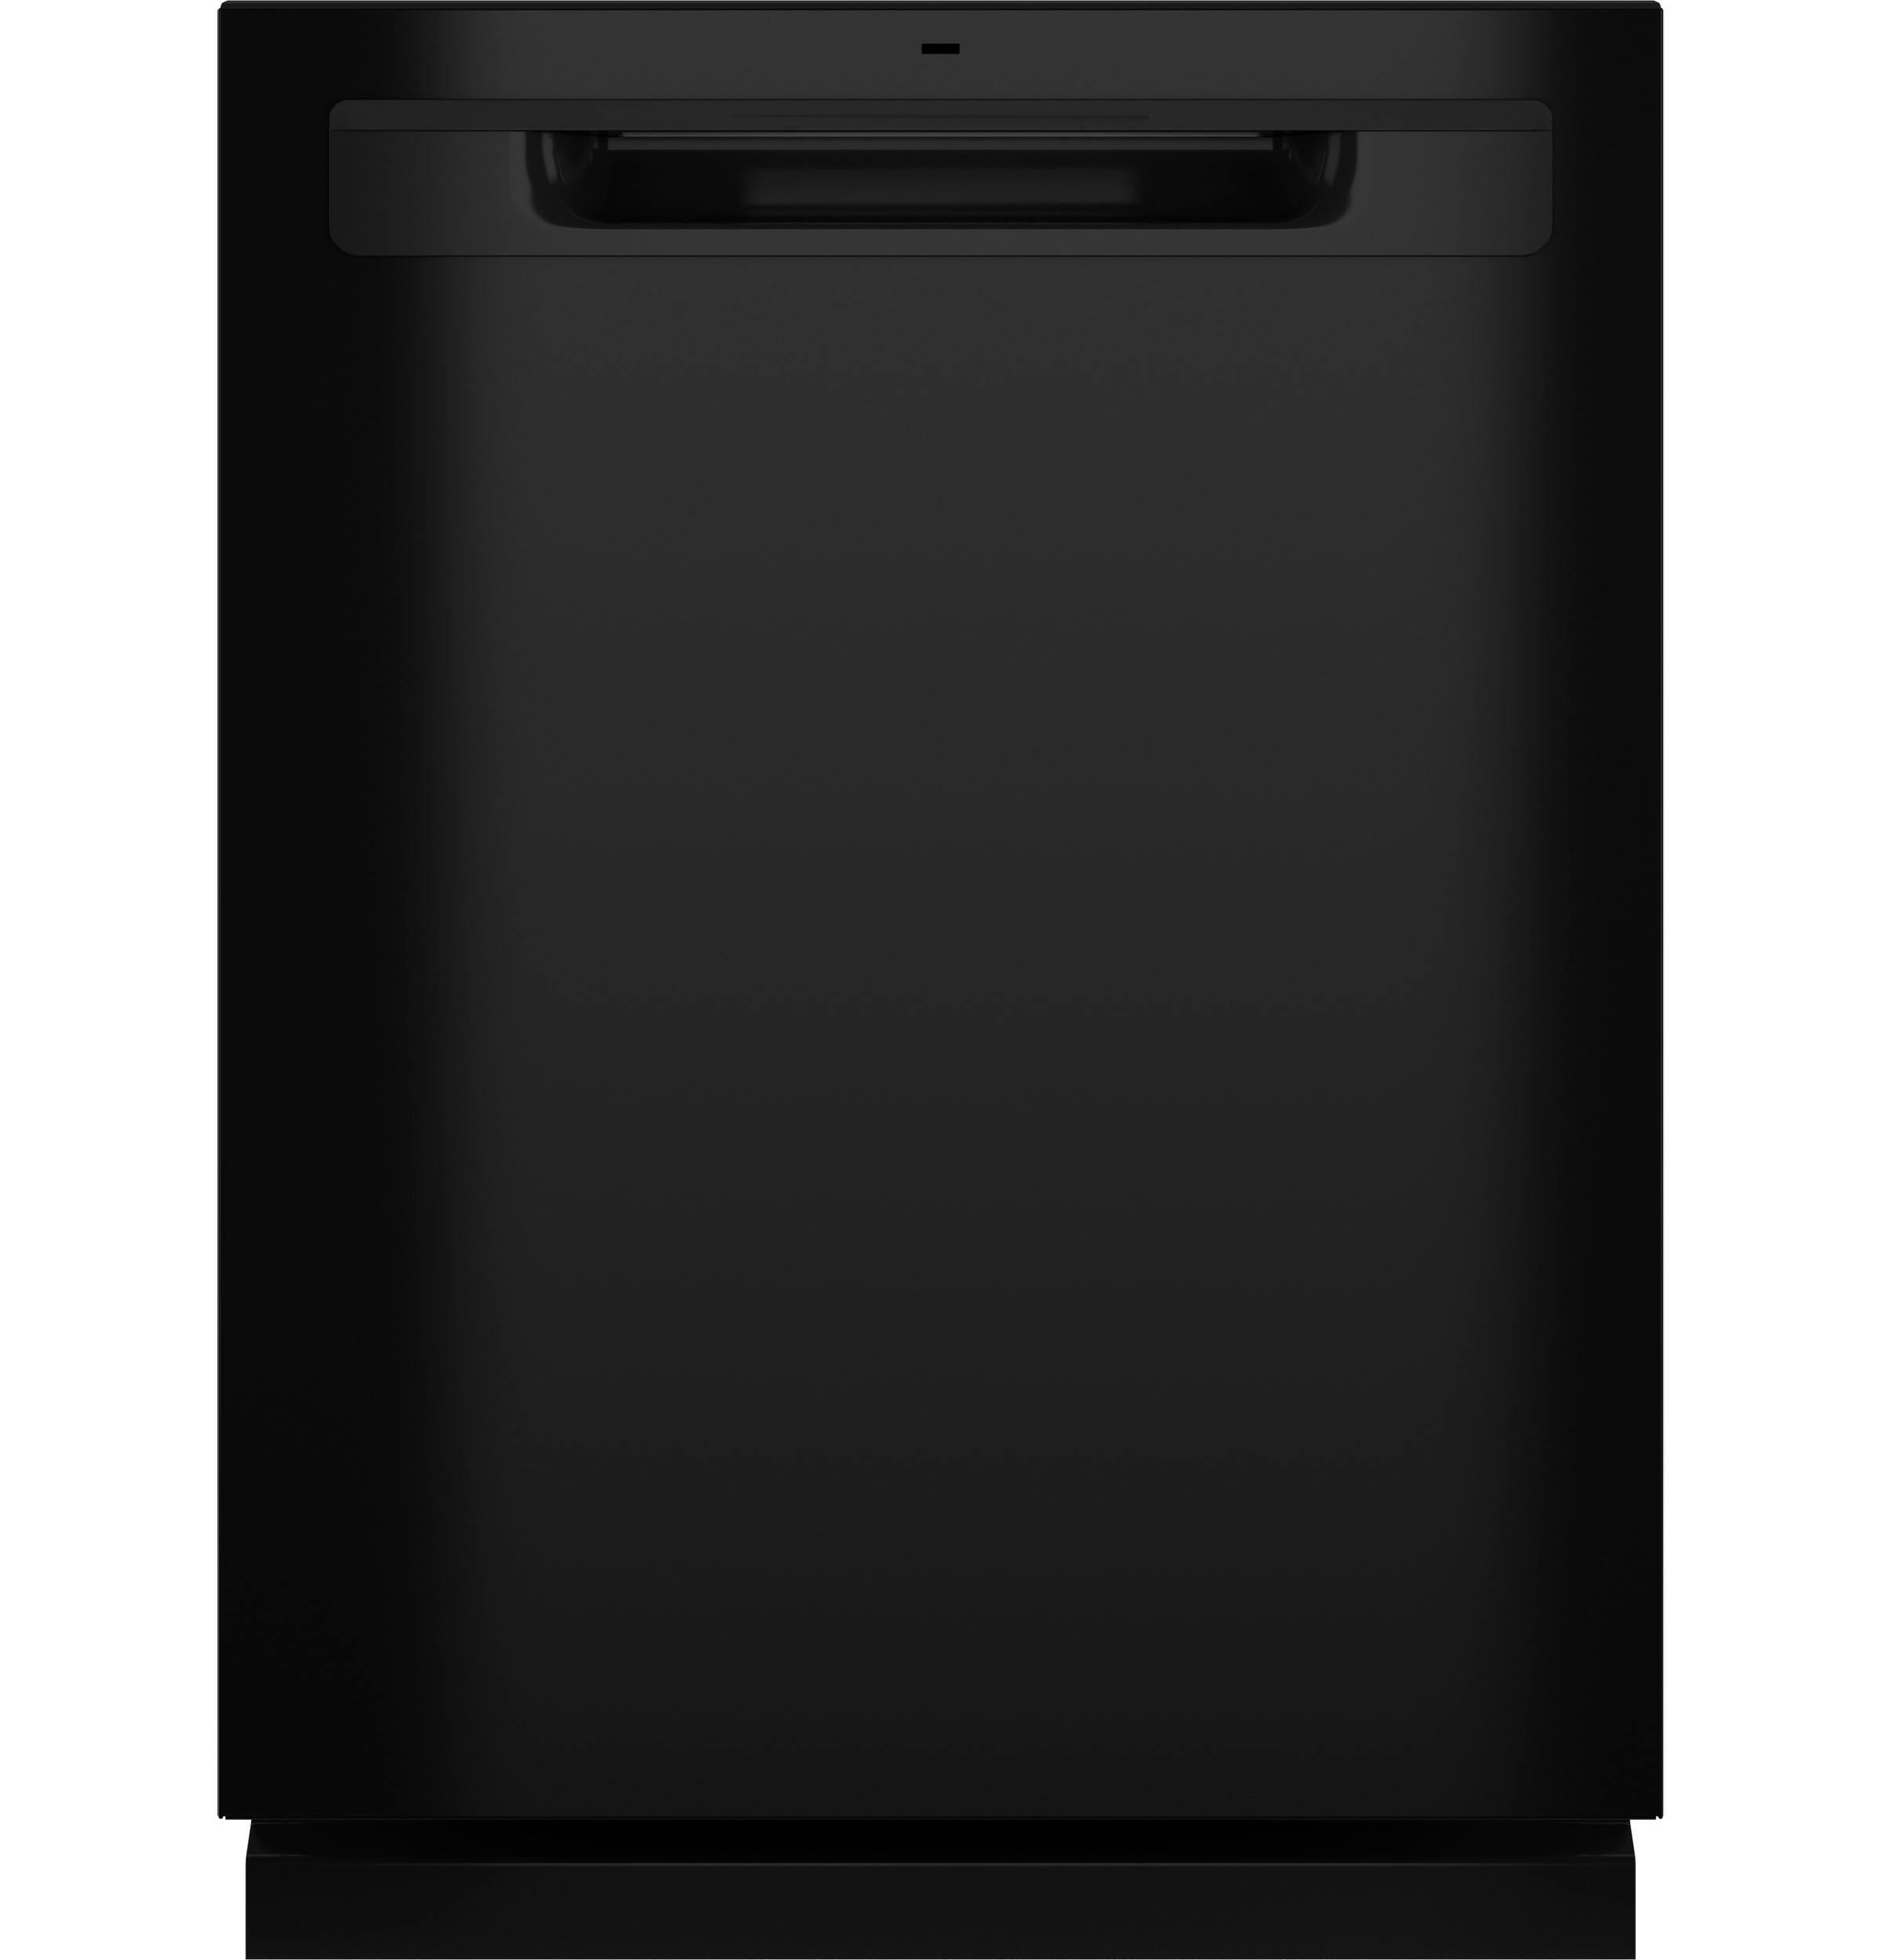 GE® ENERGY STAR® Top Control with Plastic Interior Dishwasher with Sanitize  Cycle & Dry Boost